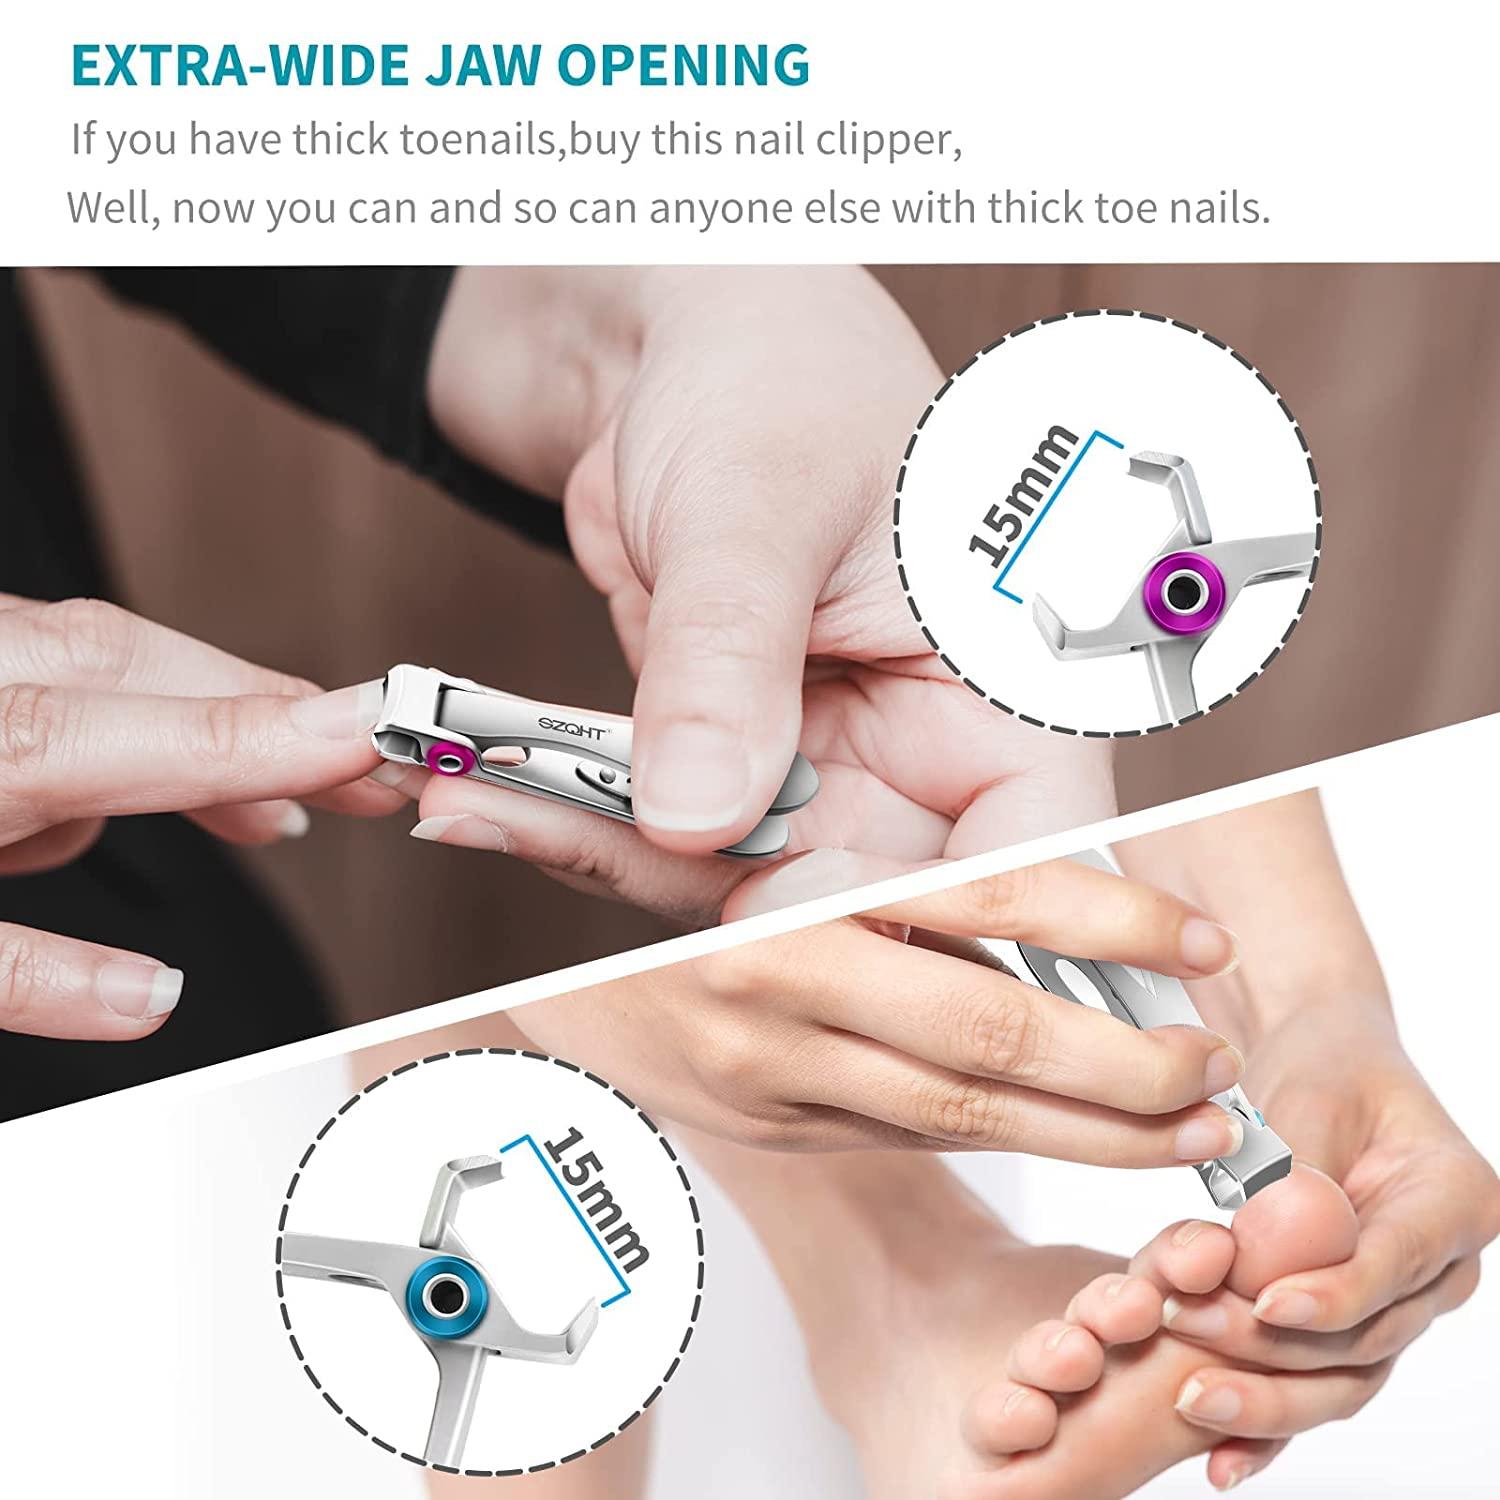 Ultra Wide Jaw Opening Big Nail Clippers Set Toenail Clippers For Thick  Nails Cutter For Men, Women, Ingrown, Manicure & Pedicure (black)